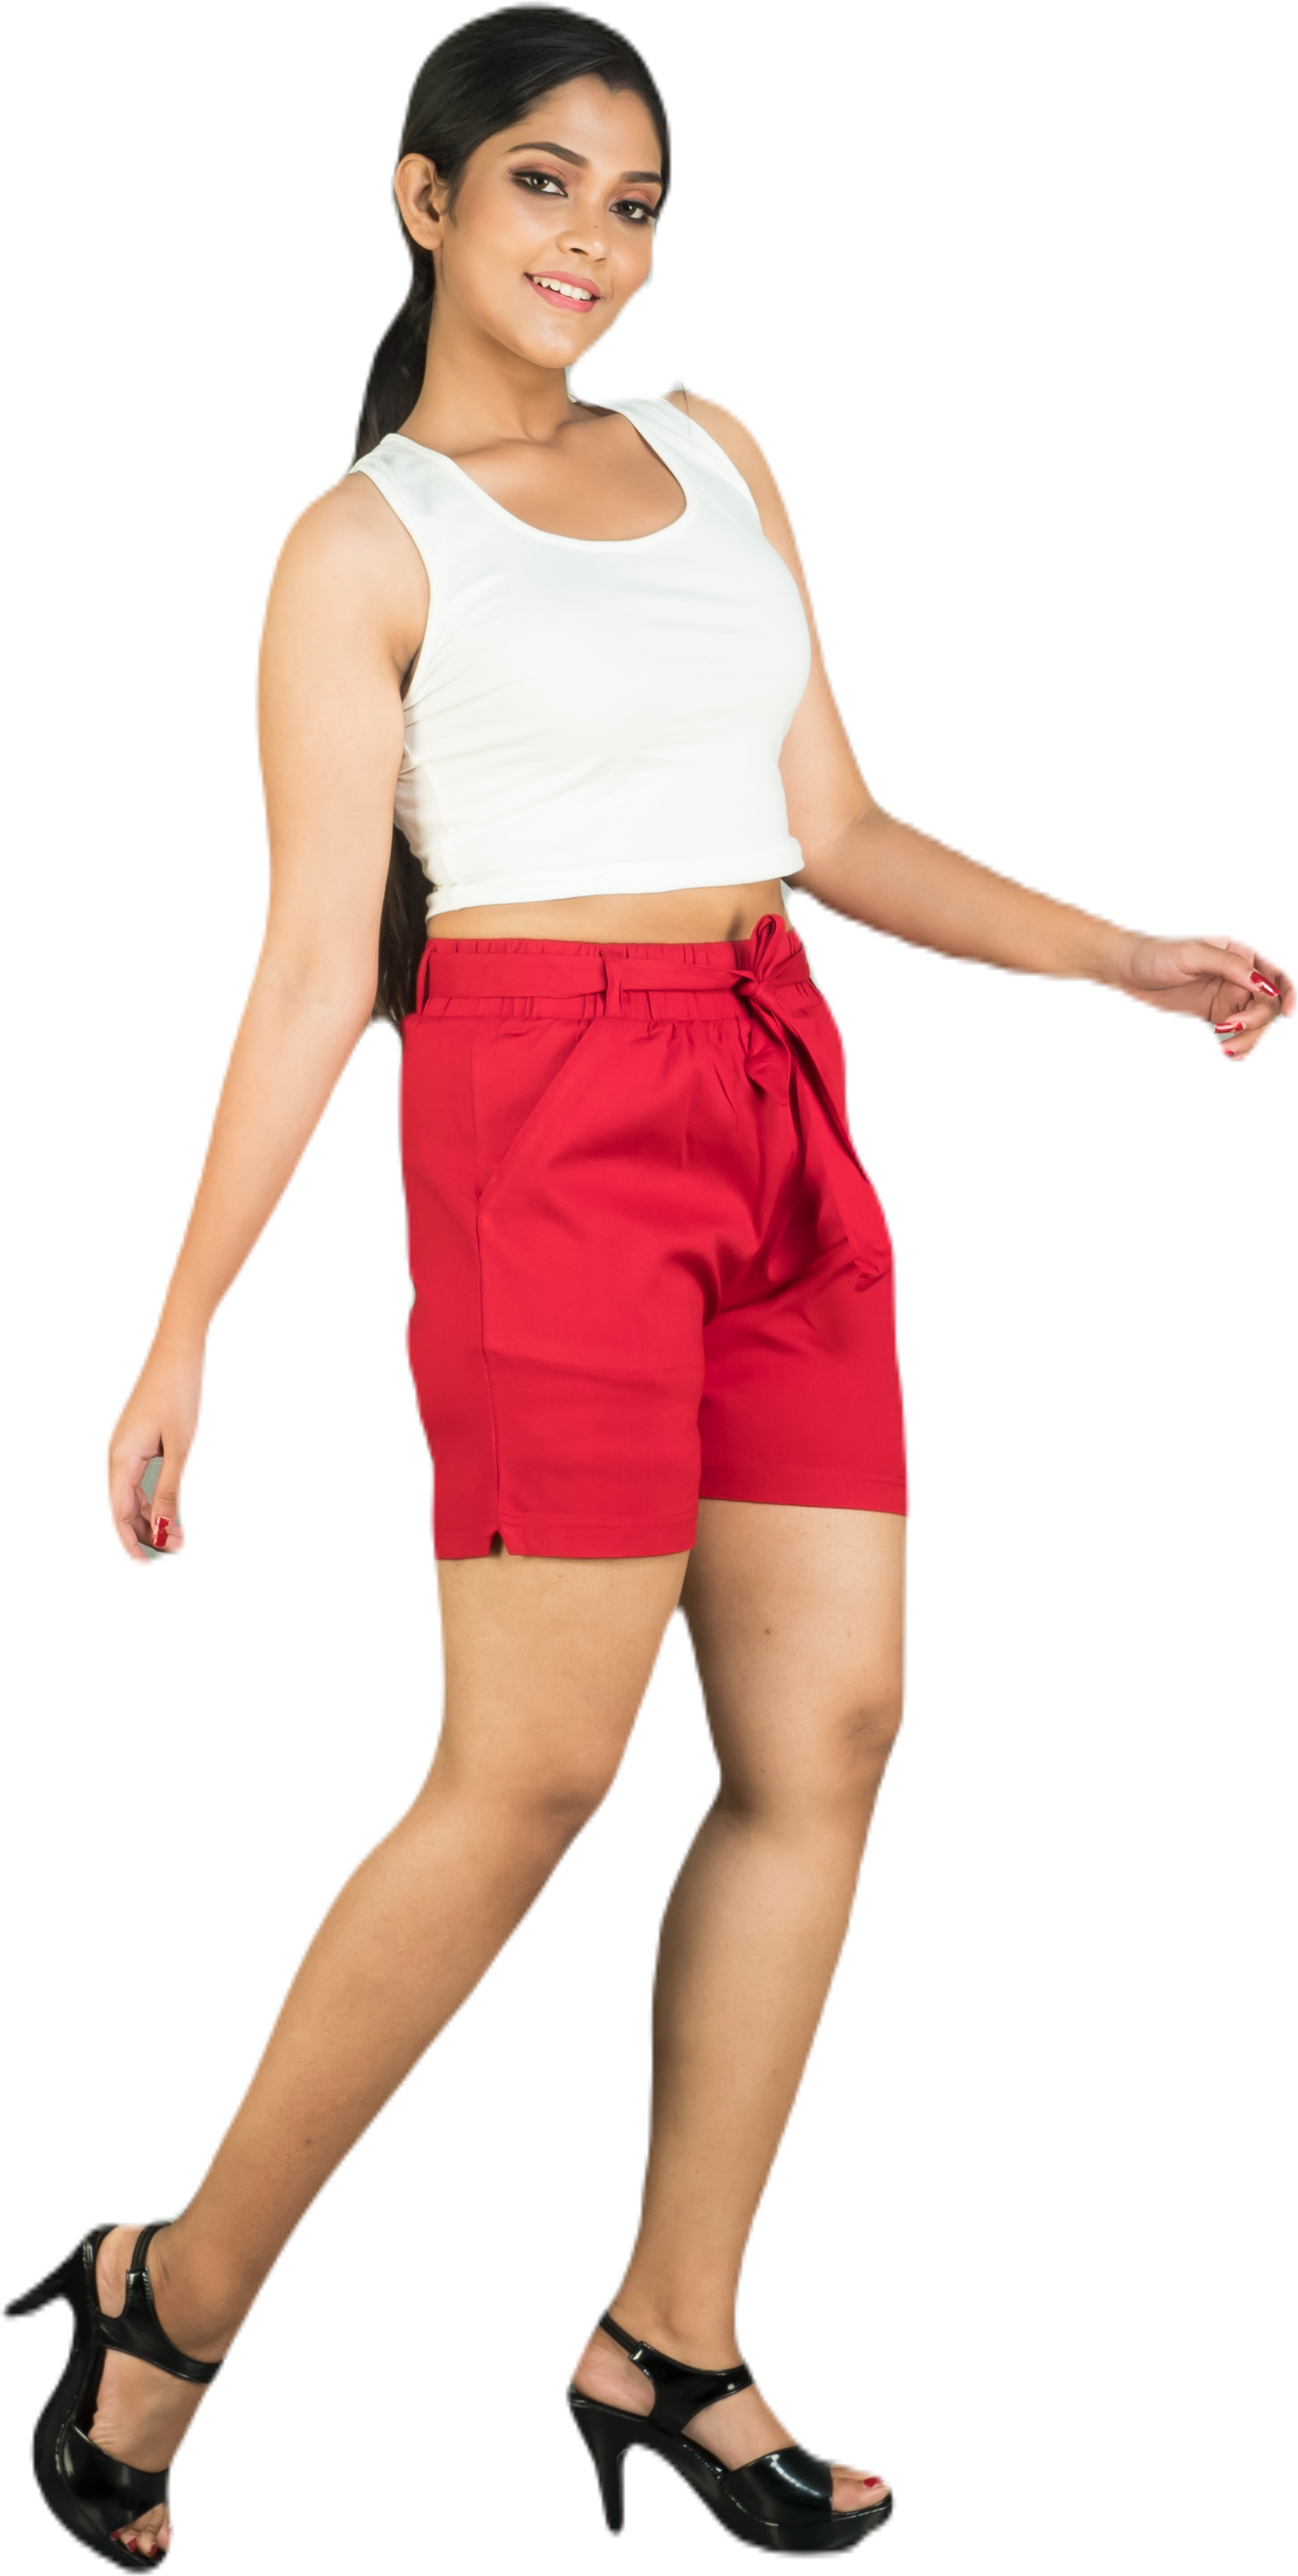 TRENDY BELTED HOT PANTS